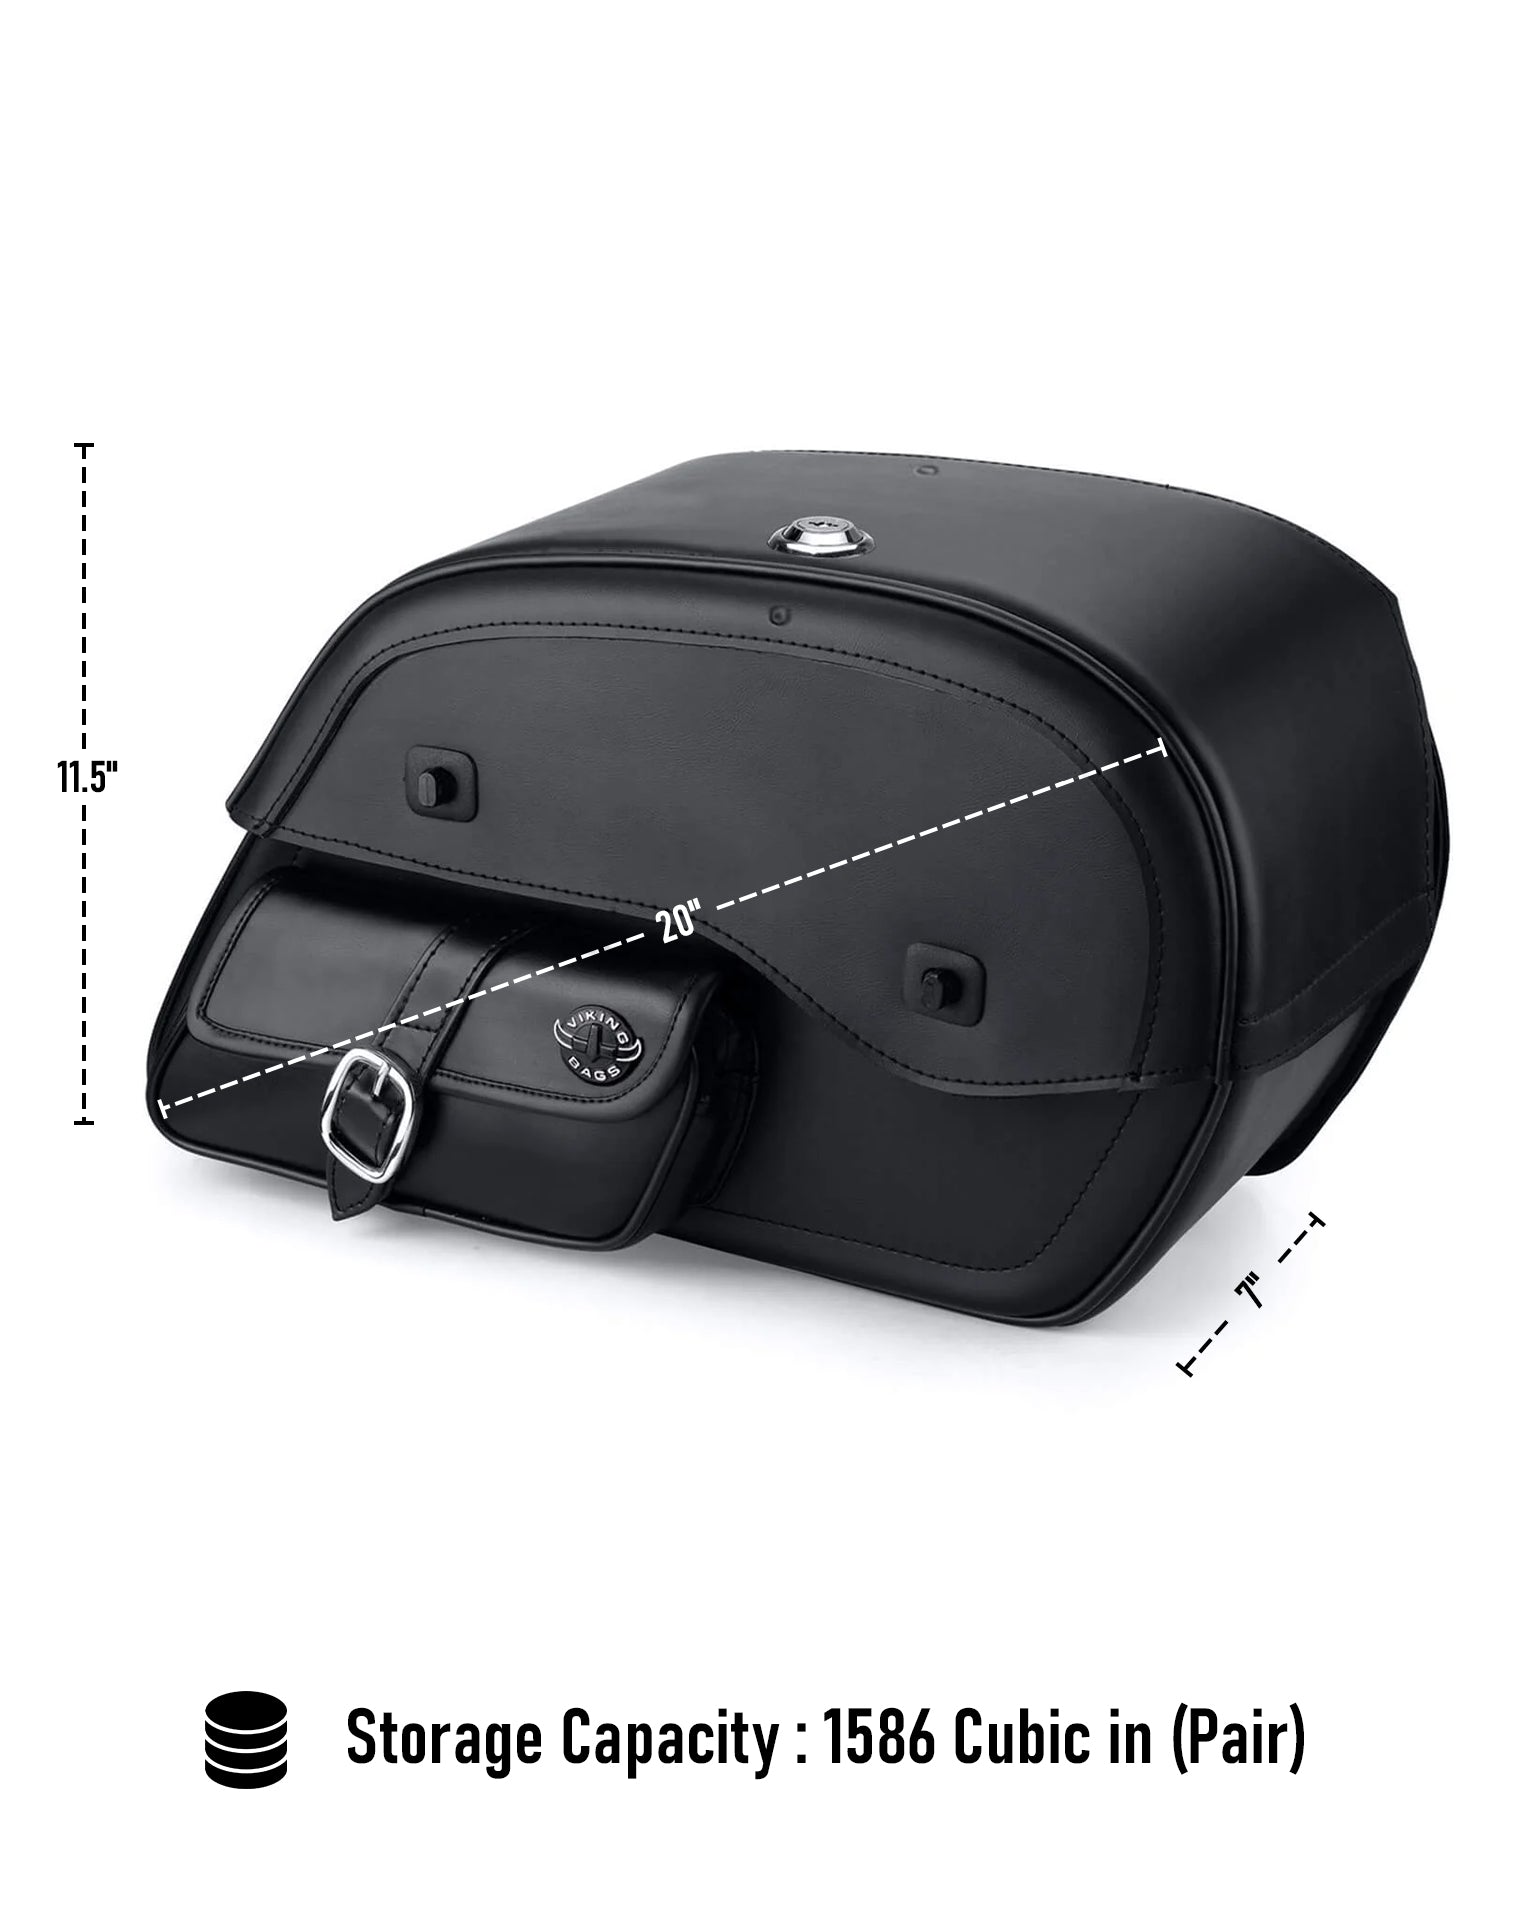 Viking Essential Side Pocket Large Kawasaki Vulcan 1500 Classic Vn1500 Shock Cutout Leather Motorcycle Saddlebags Can Store Your Ridings Gears